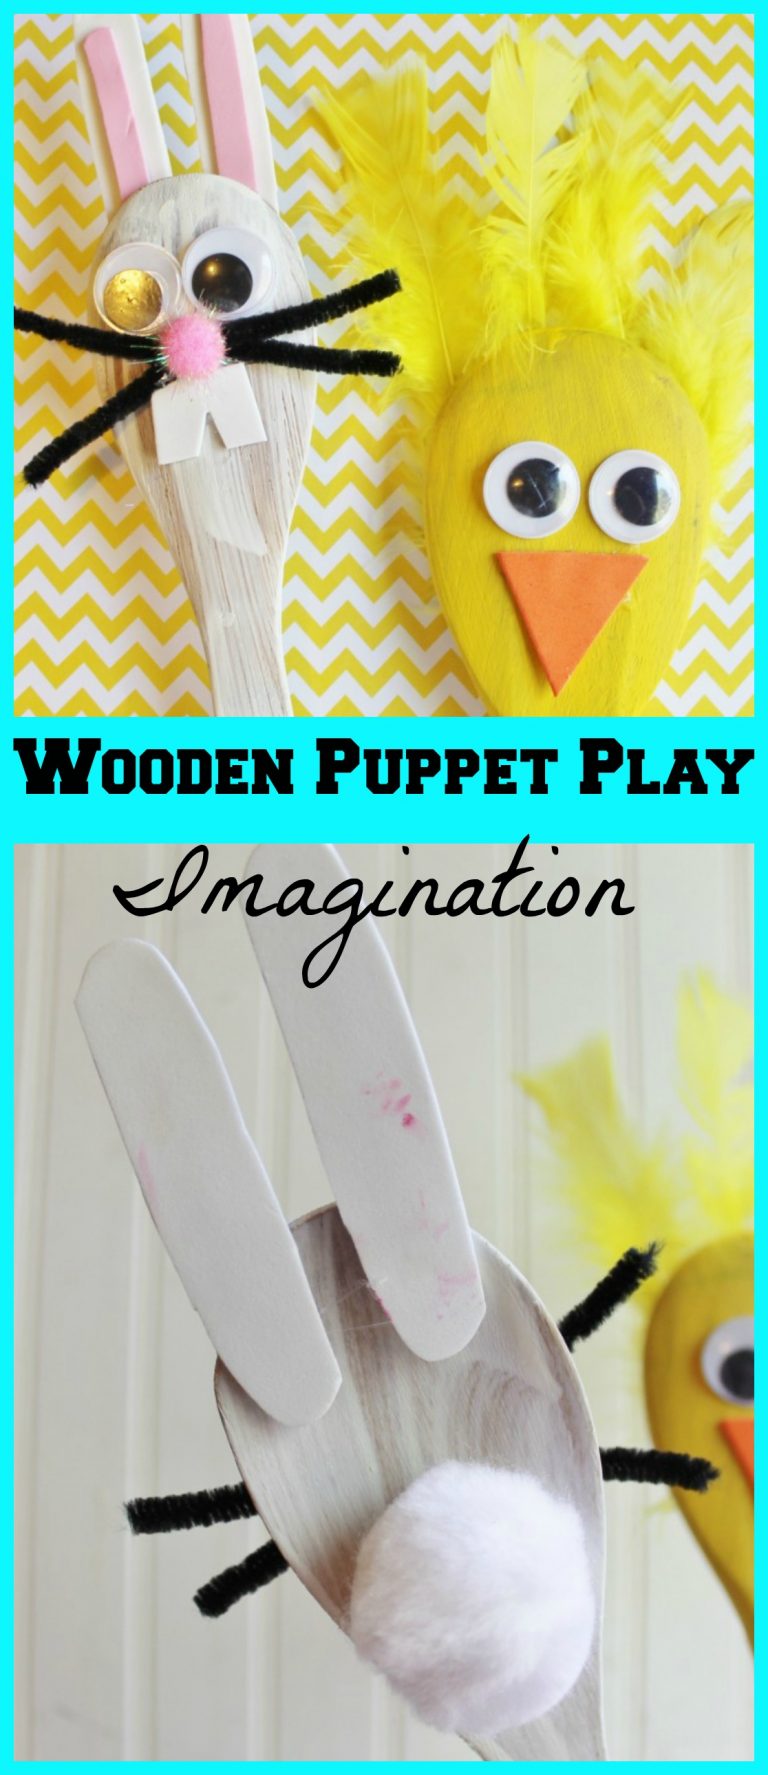 Spring Chick & Easter Bunny Wooden Spoon Puppets for Kids